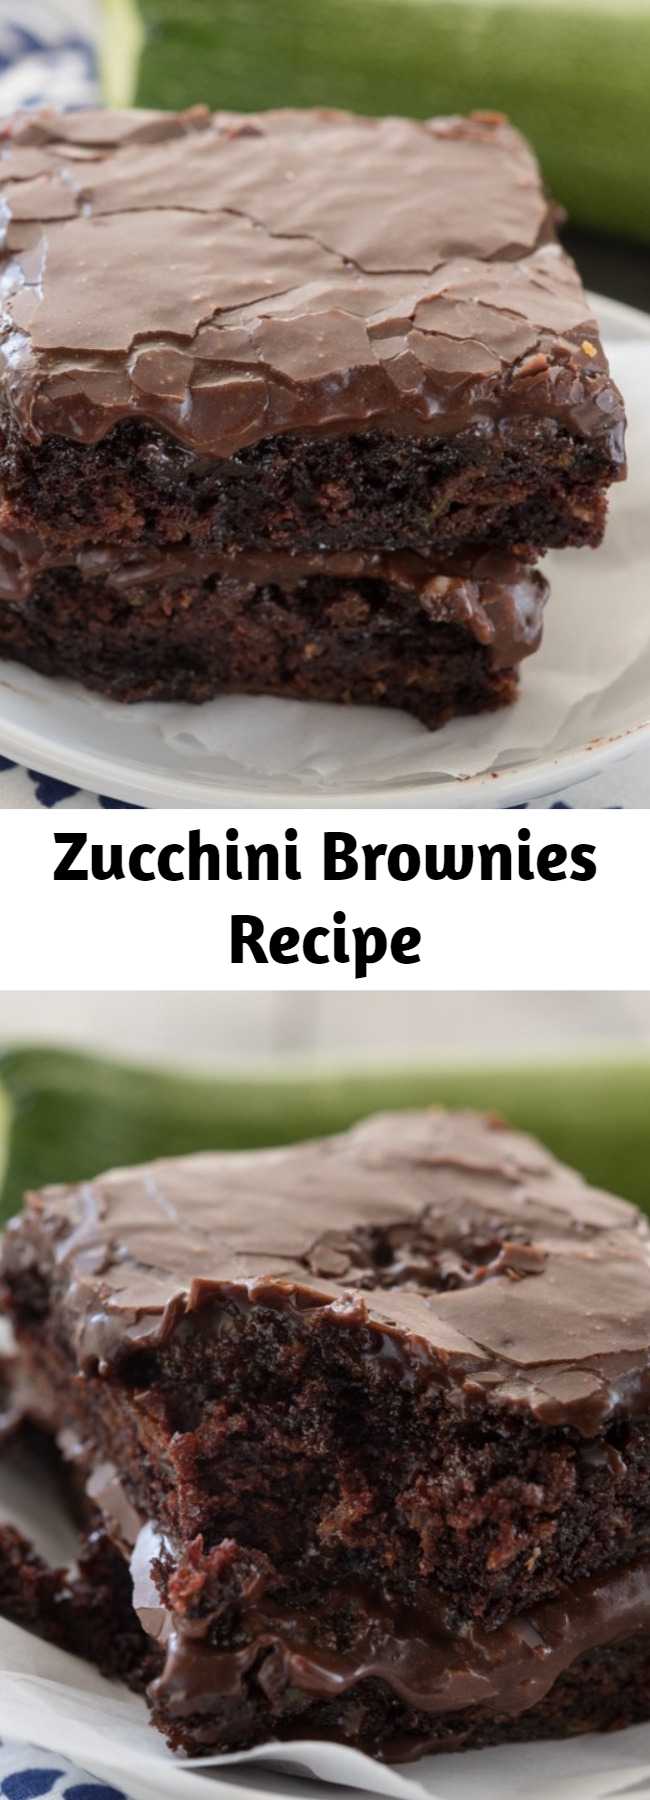 Zucchini Brownies Recipe - Zucchini brownies are a healthier recipe for brownies, and these are the BEST zucchini brownies ever! They’re ooey, gooey, and SUPER fudgy brownies. And NO one will know they have zucchini inside!